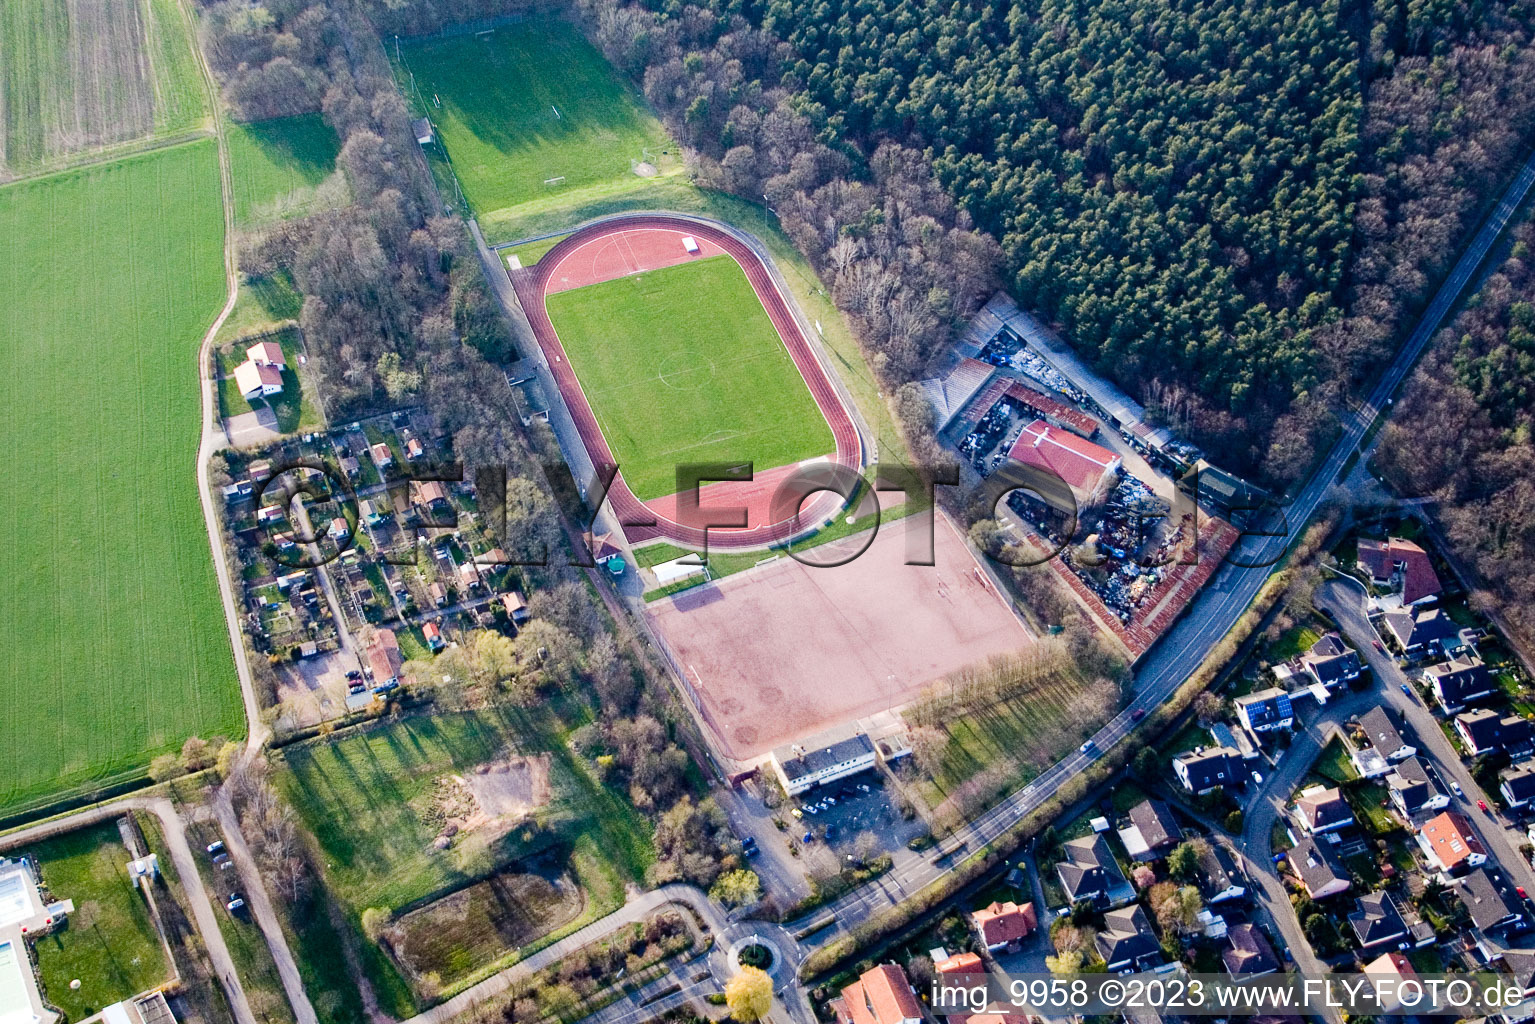 Aerial view of Sports ground in Bellheim in the state Rhineland-Palatinate, Germany